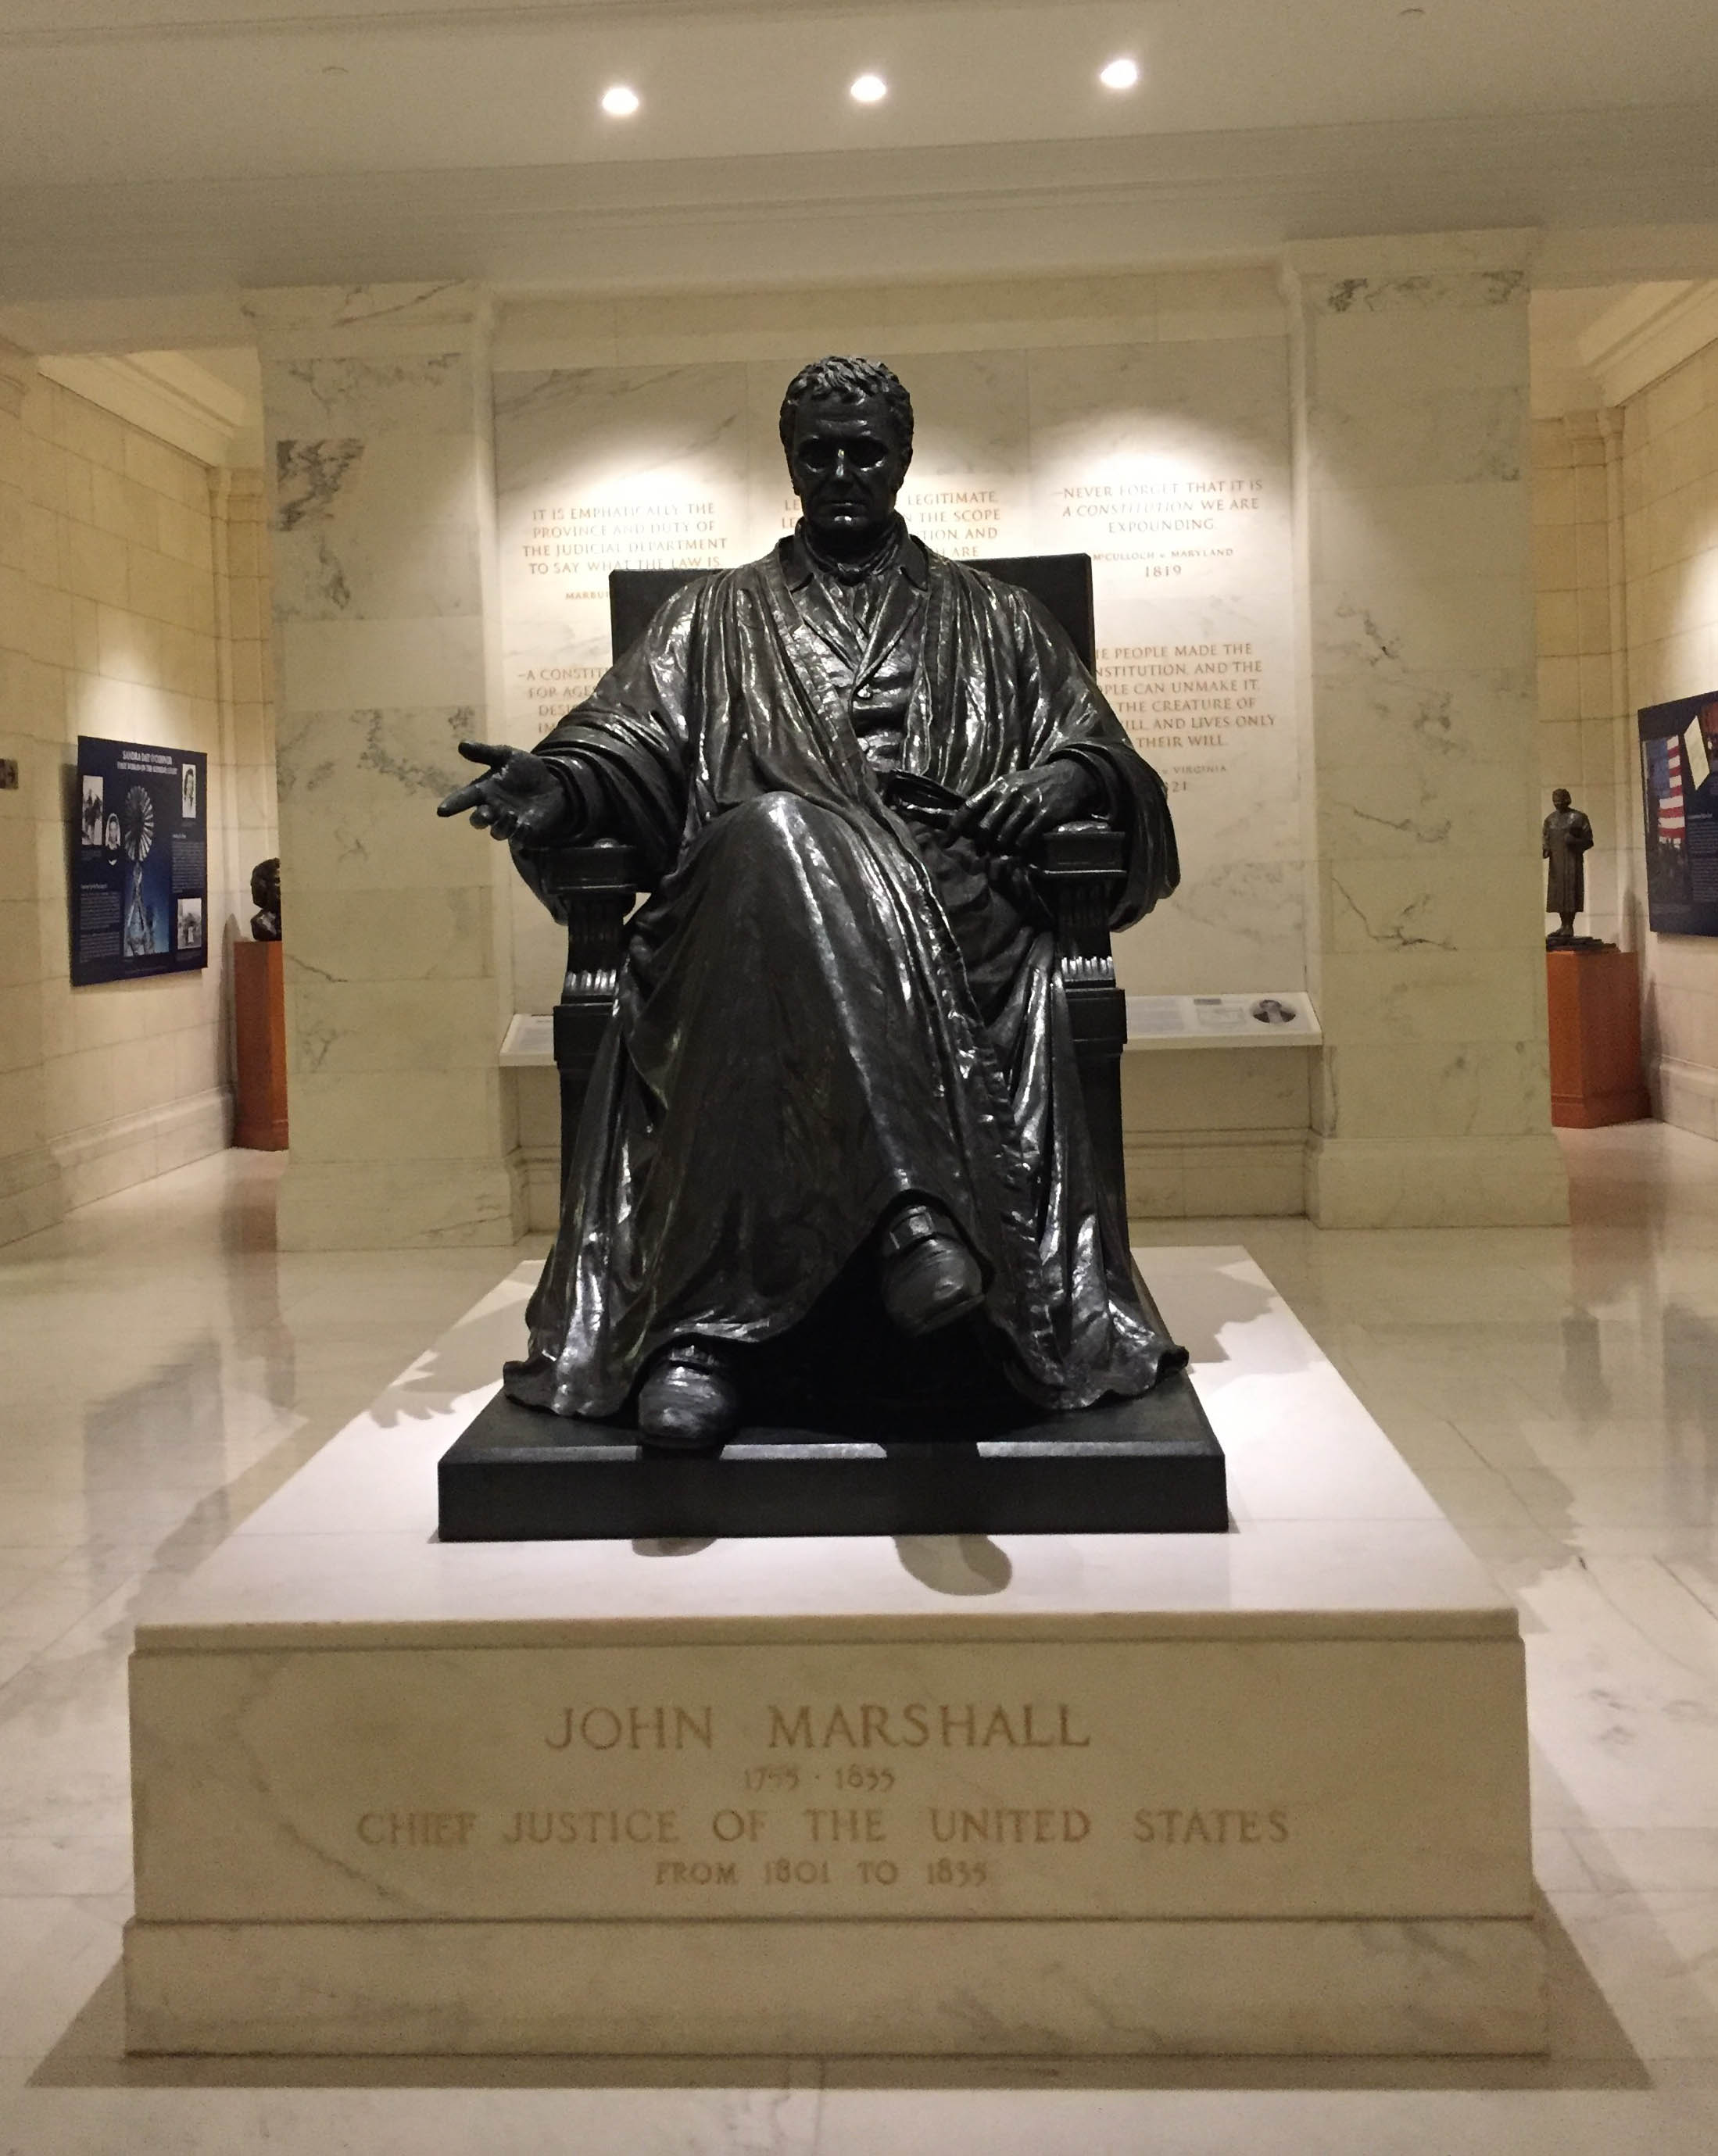 A statue of Chief Justice John Marshall at the U.S. Supreme Court. (Photo courtesy of Michele Deitch)